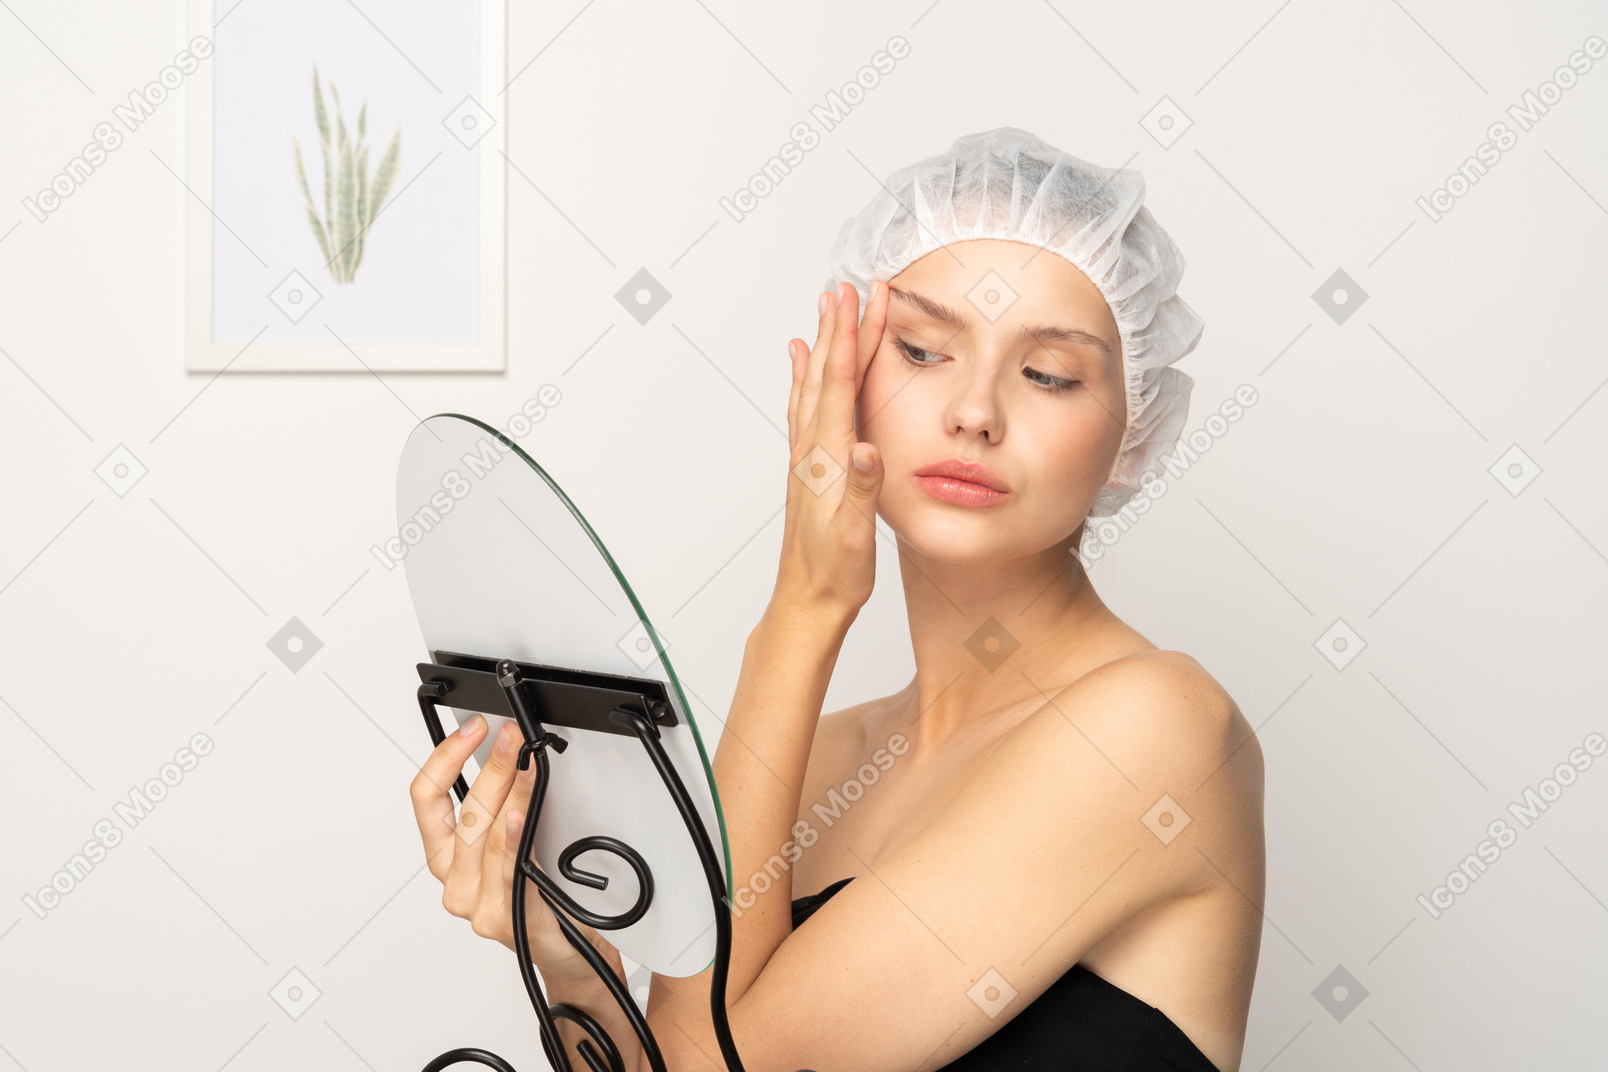 Young woman tightening her face skin while looking in the mirror